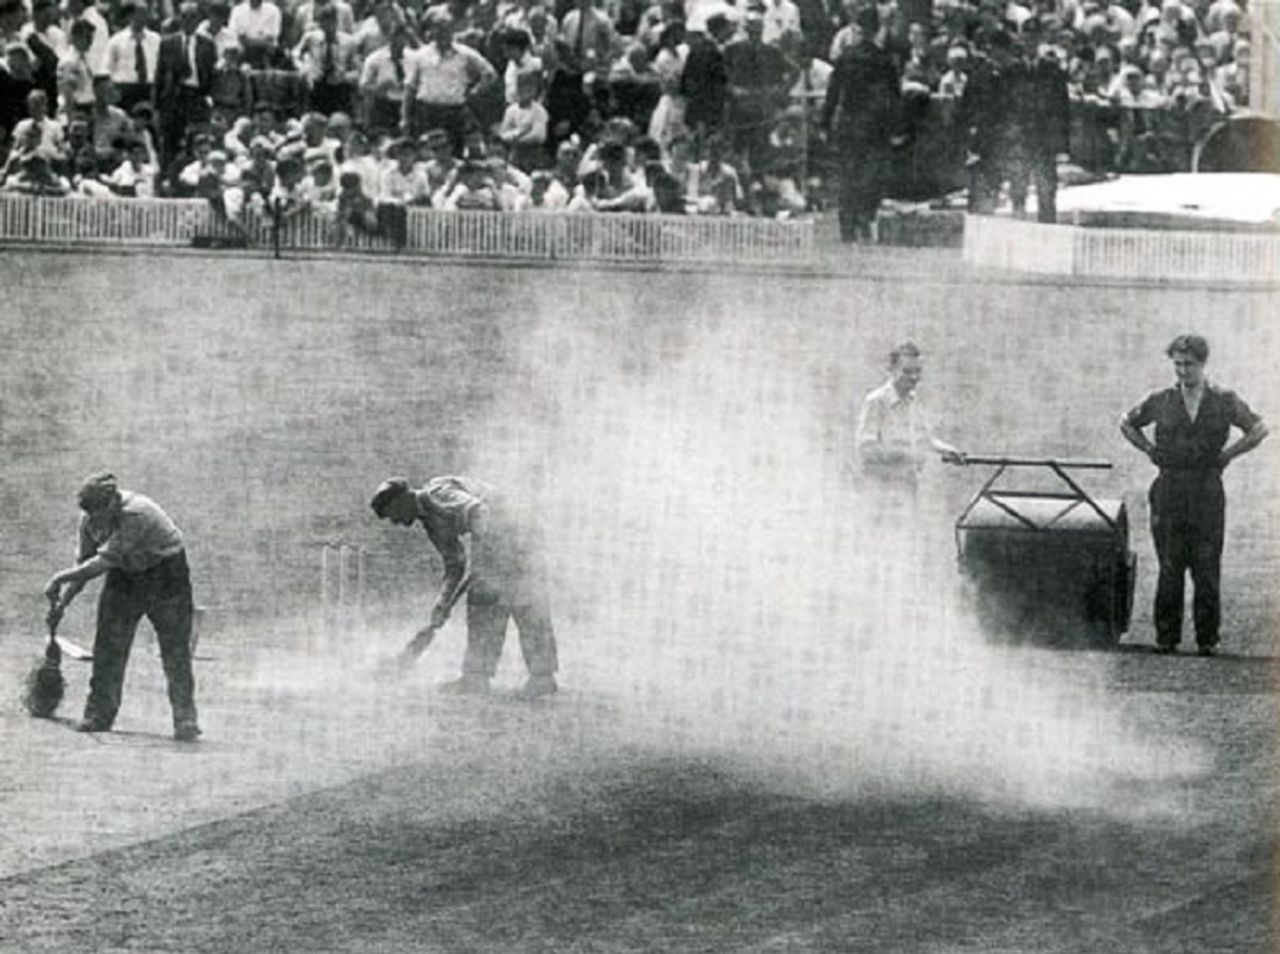 Clouds of dust as groundstaff sweep the pitch before Australia's first innings, England v Australia, Manchester, July 27, 1956